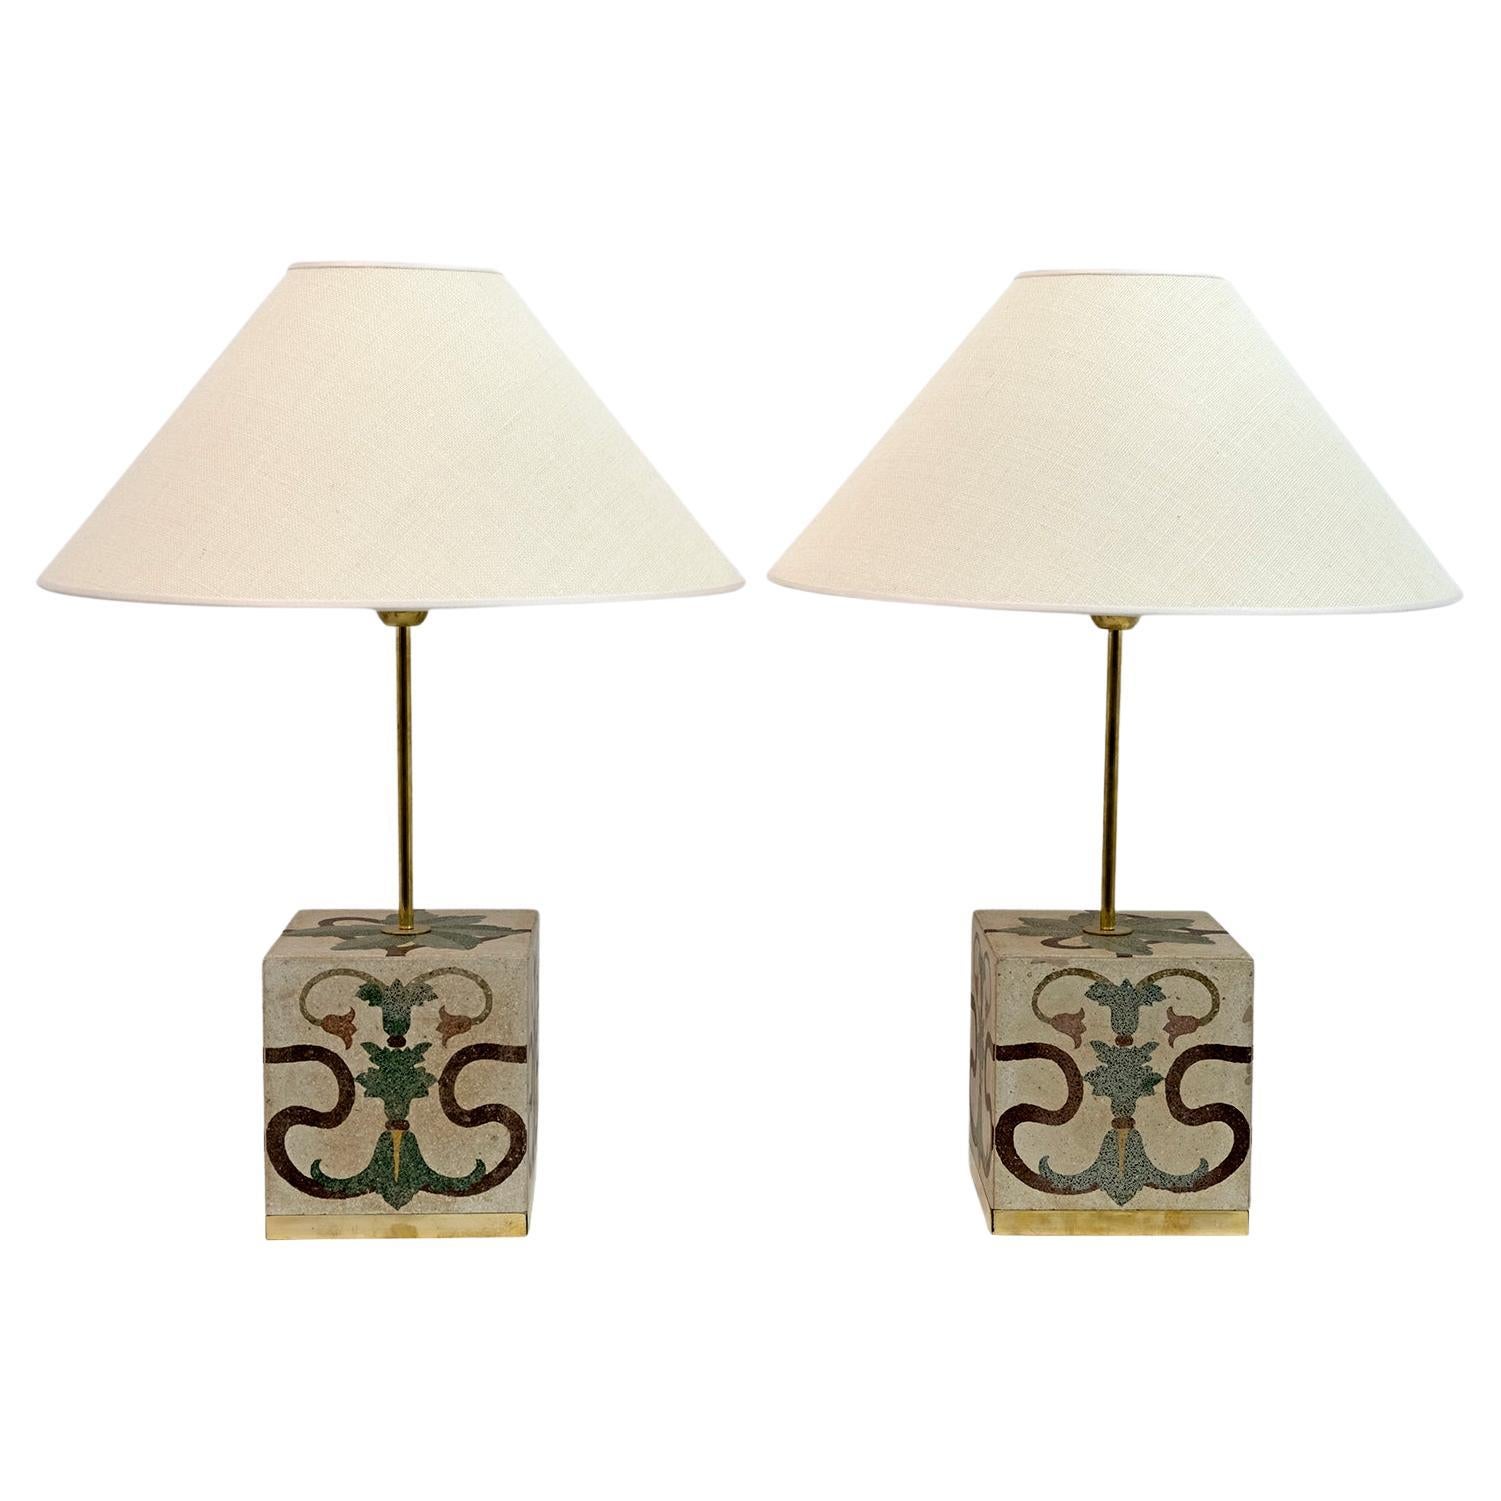 Pair of Italian Art Nouveau vintage cementite table lamps
The lamps were made in Italy in the 1920s using cement tiles with floral decorations typical of Art Nouveau, the frames on the base are in brass, including the attacks of the